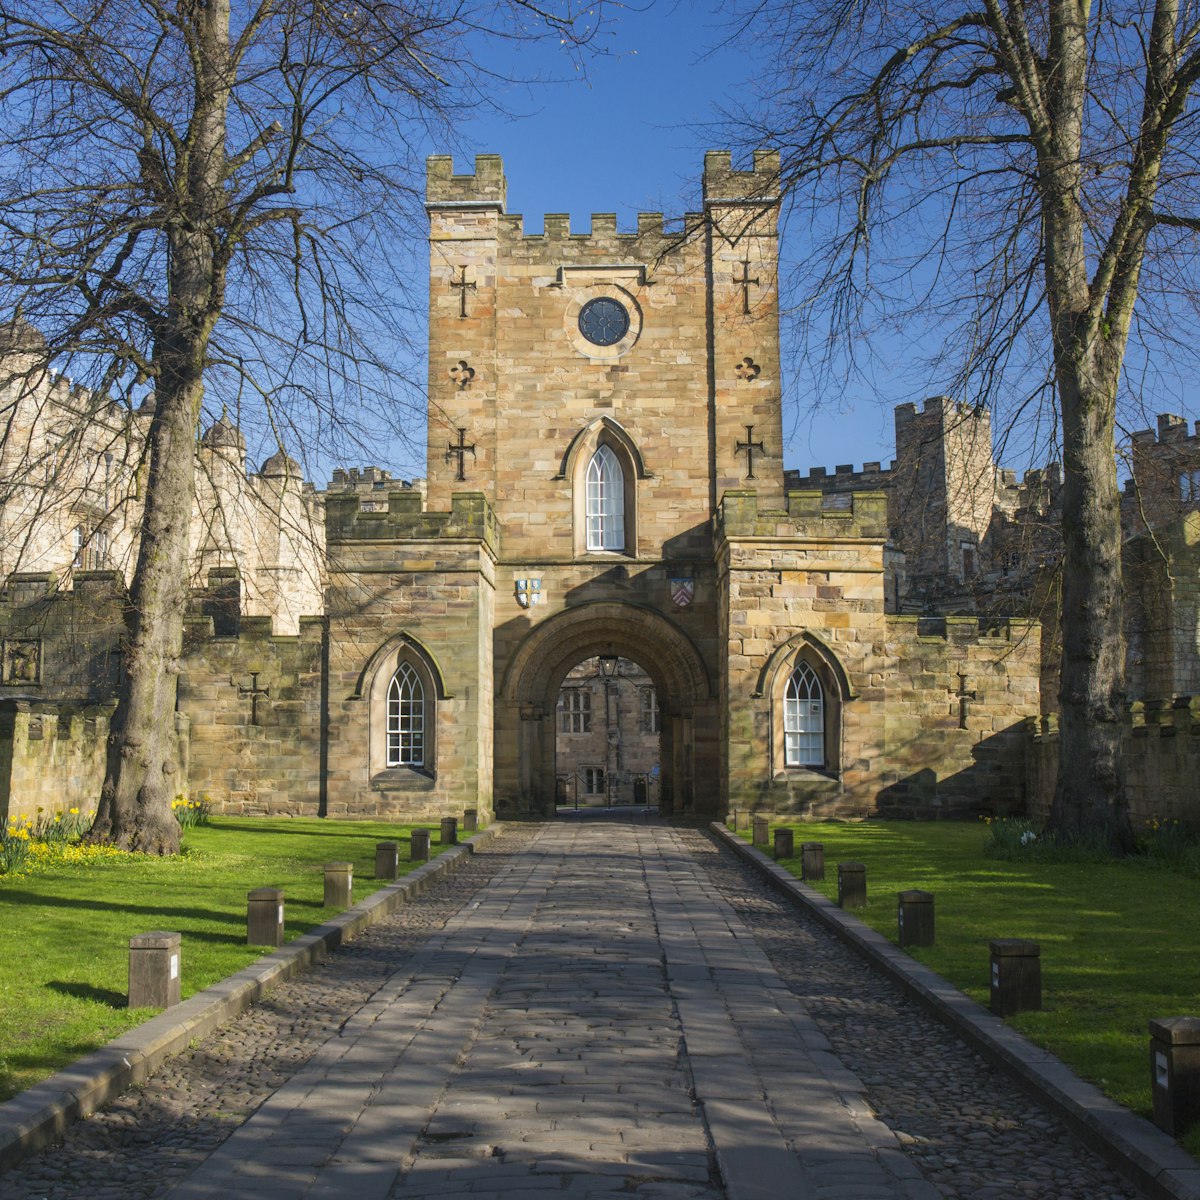 View from Palace Green to the Gatehouse of Durham Castle, Durham, County Durham, England, UK, Europe. The city of Durham, which lies on the River Wear a few miles south of Newcastle-upon-Tyne, is best known for its Norman cathedral and castle, which together were designated a UNESCO World Heritage Site in 1986. The city also boasts a prestigious university, said to be the oldest in England after Oxford and Cambridge, the castle having served as the home of University College since 1837.
918544372